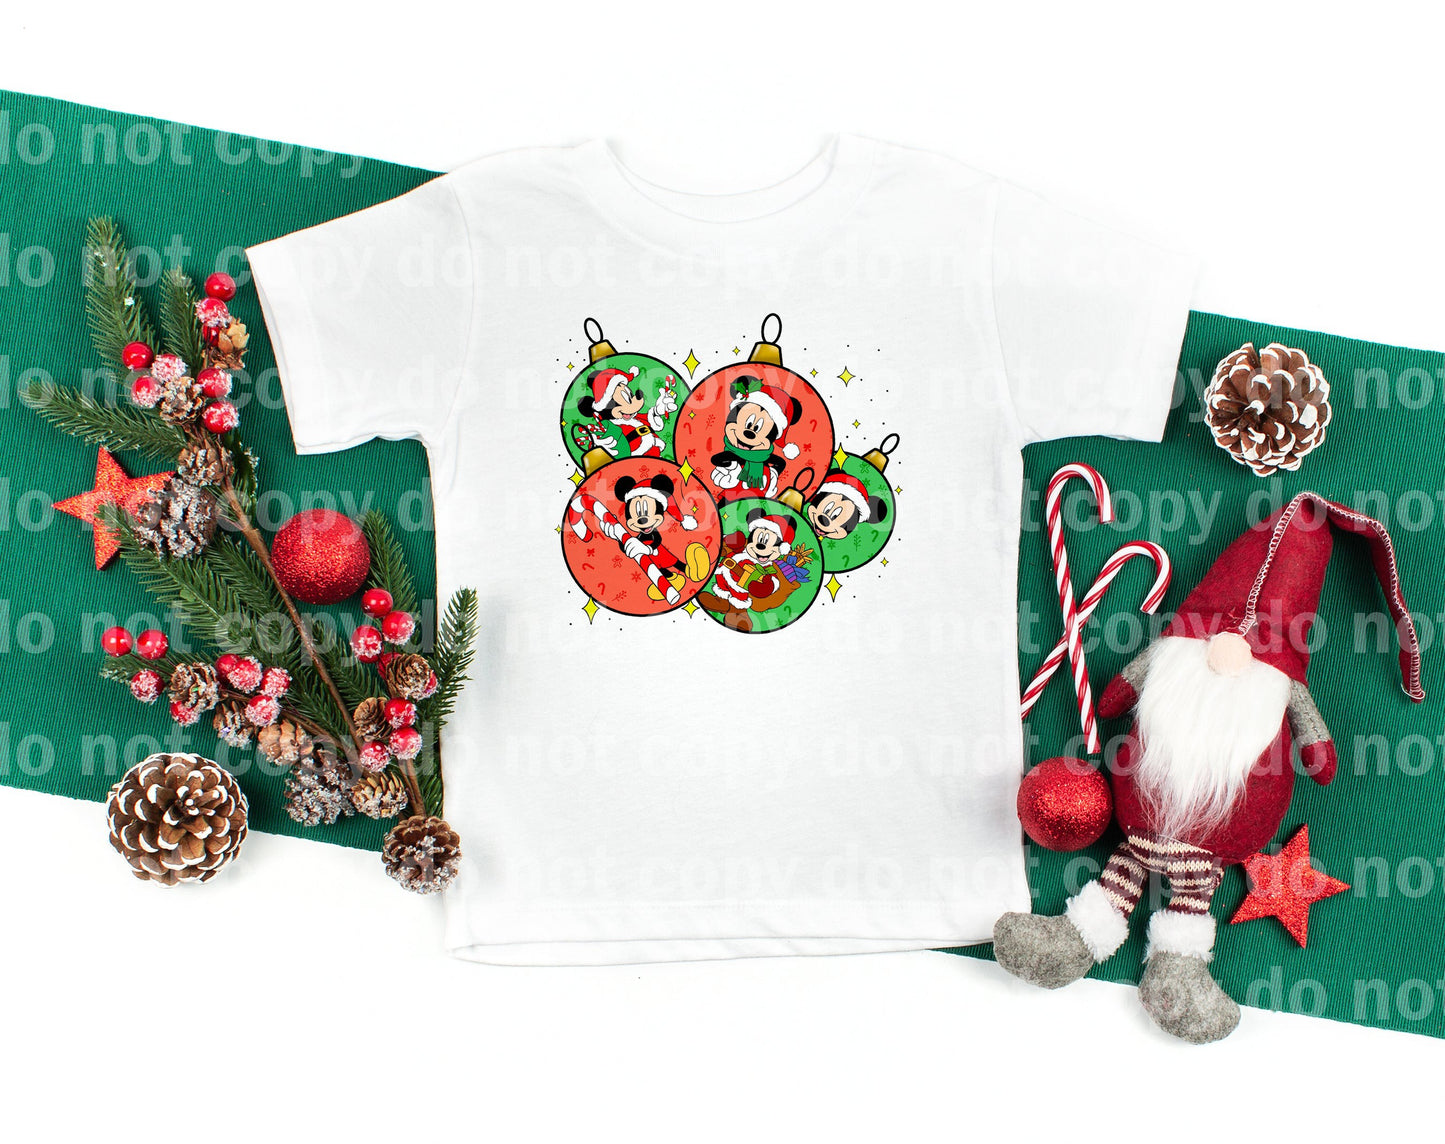 Mouse Christmas Ornament Balls with Optional Sleeve Design Dream Print or Sublimation Print